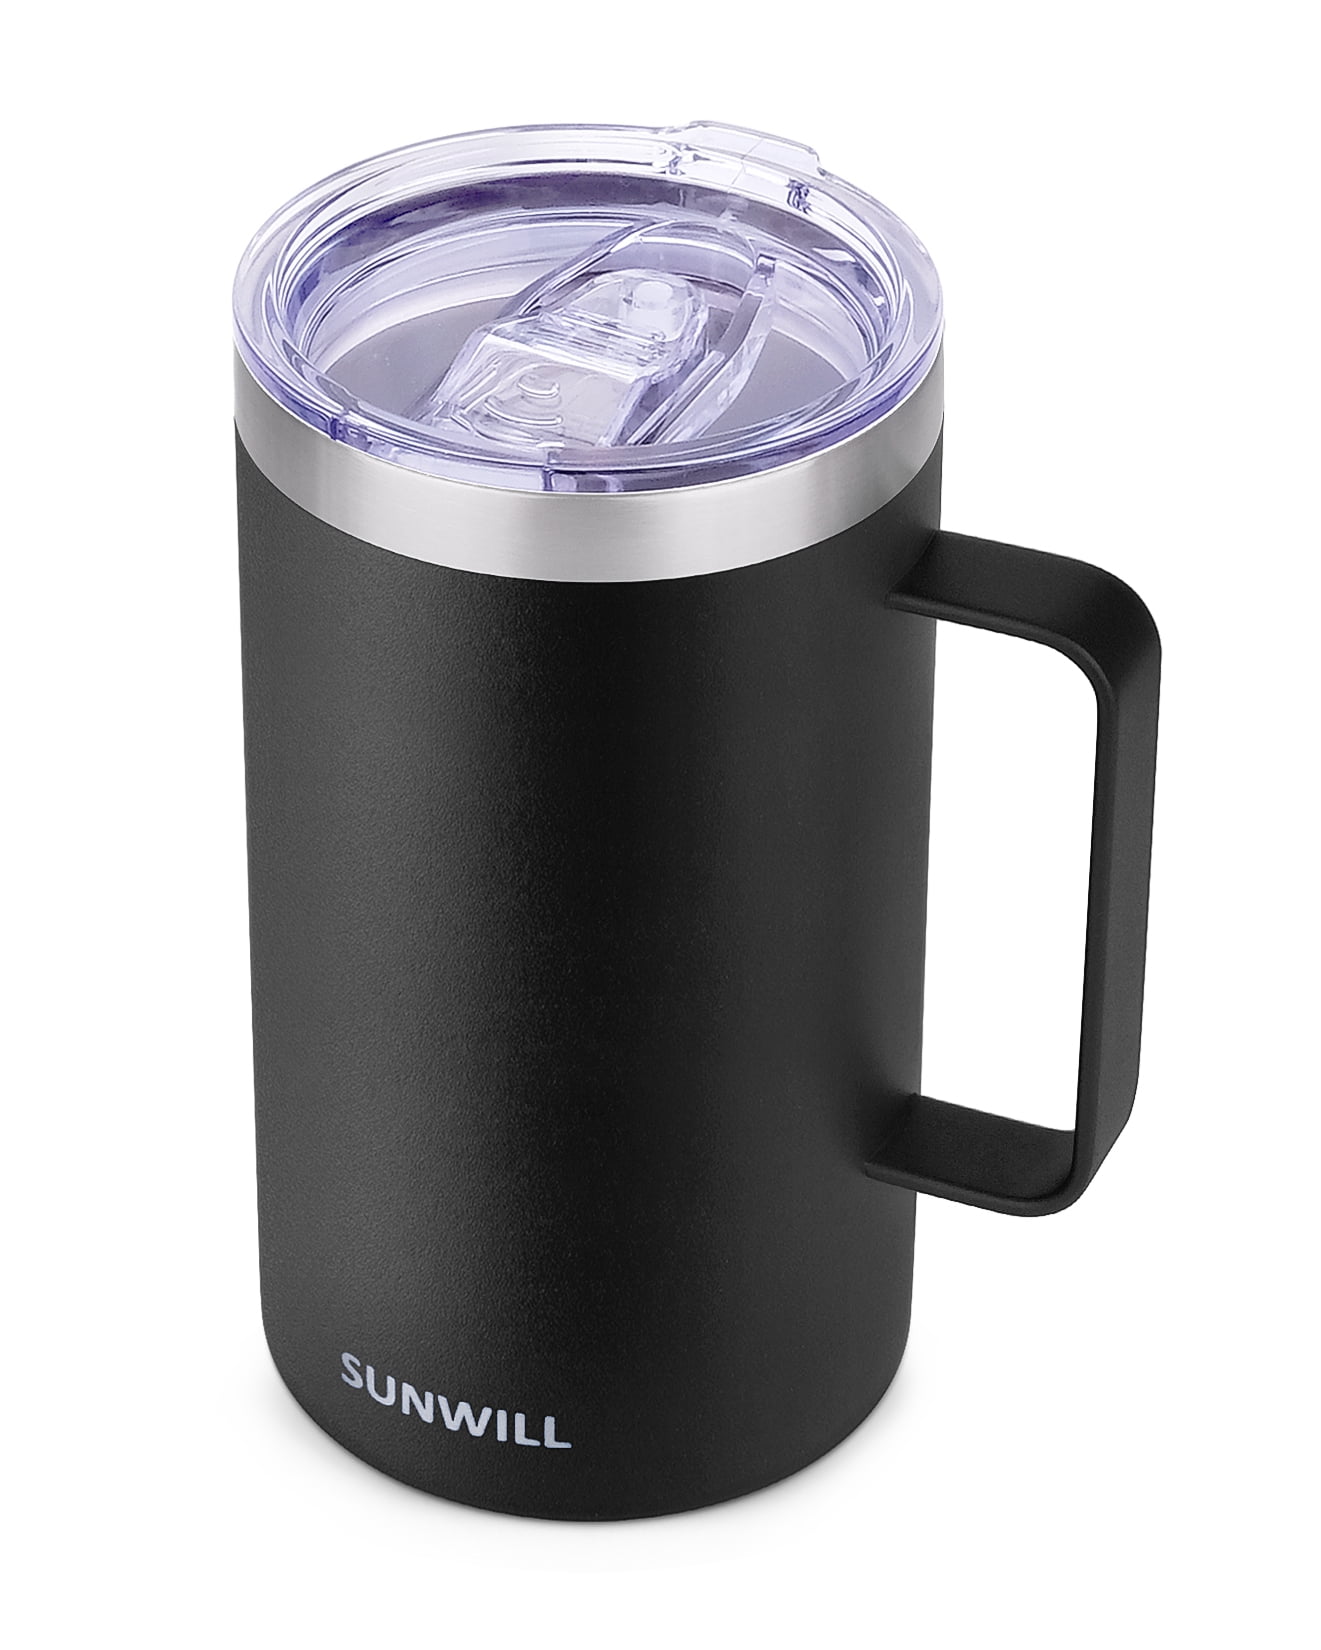 Personalized Spill-Proof Stainless Steel 16oz Coffee Mug, High Quality  Camping Cold Brew Drink Mug